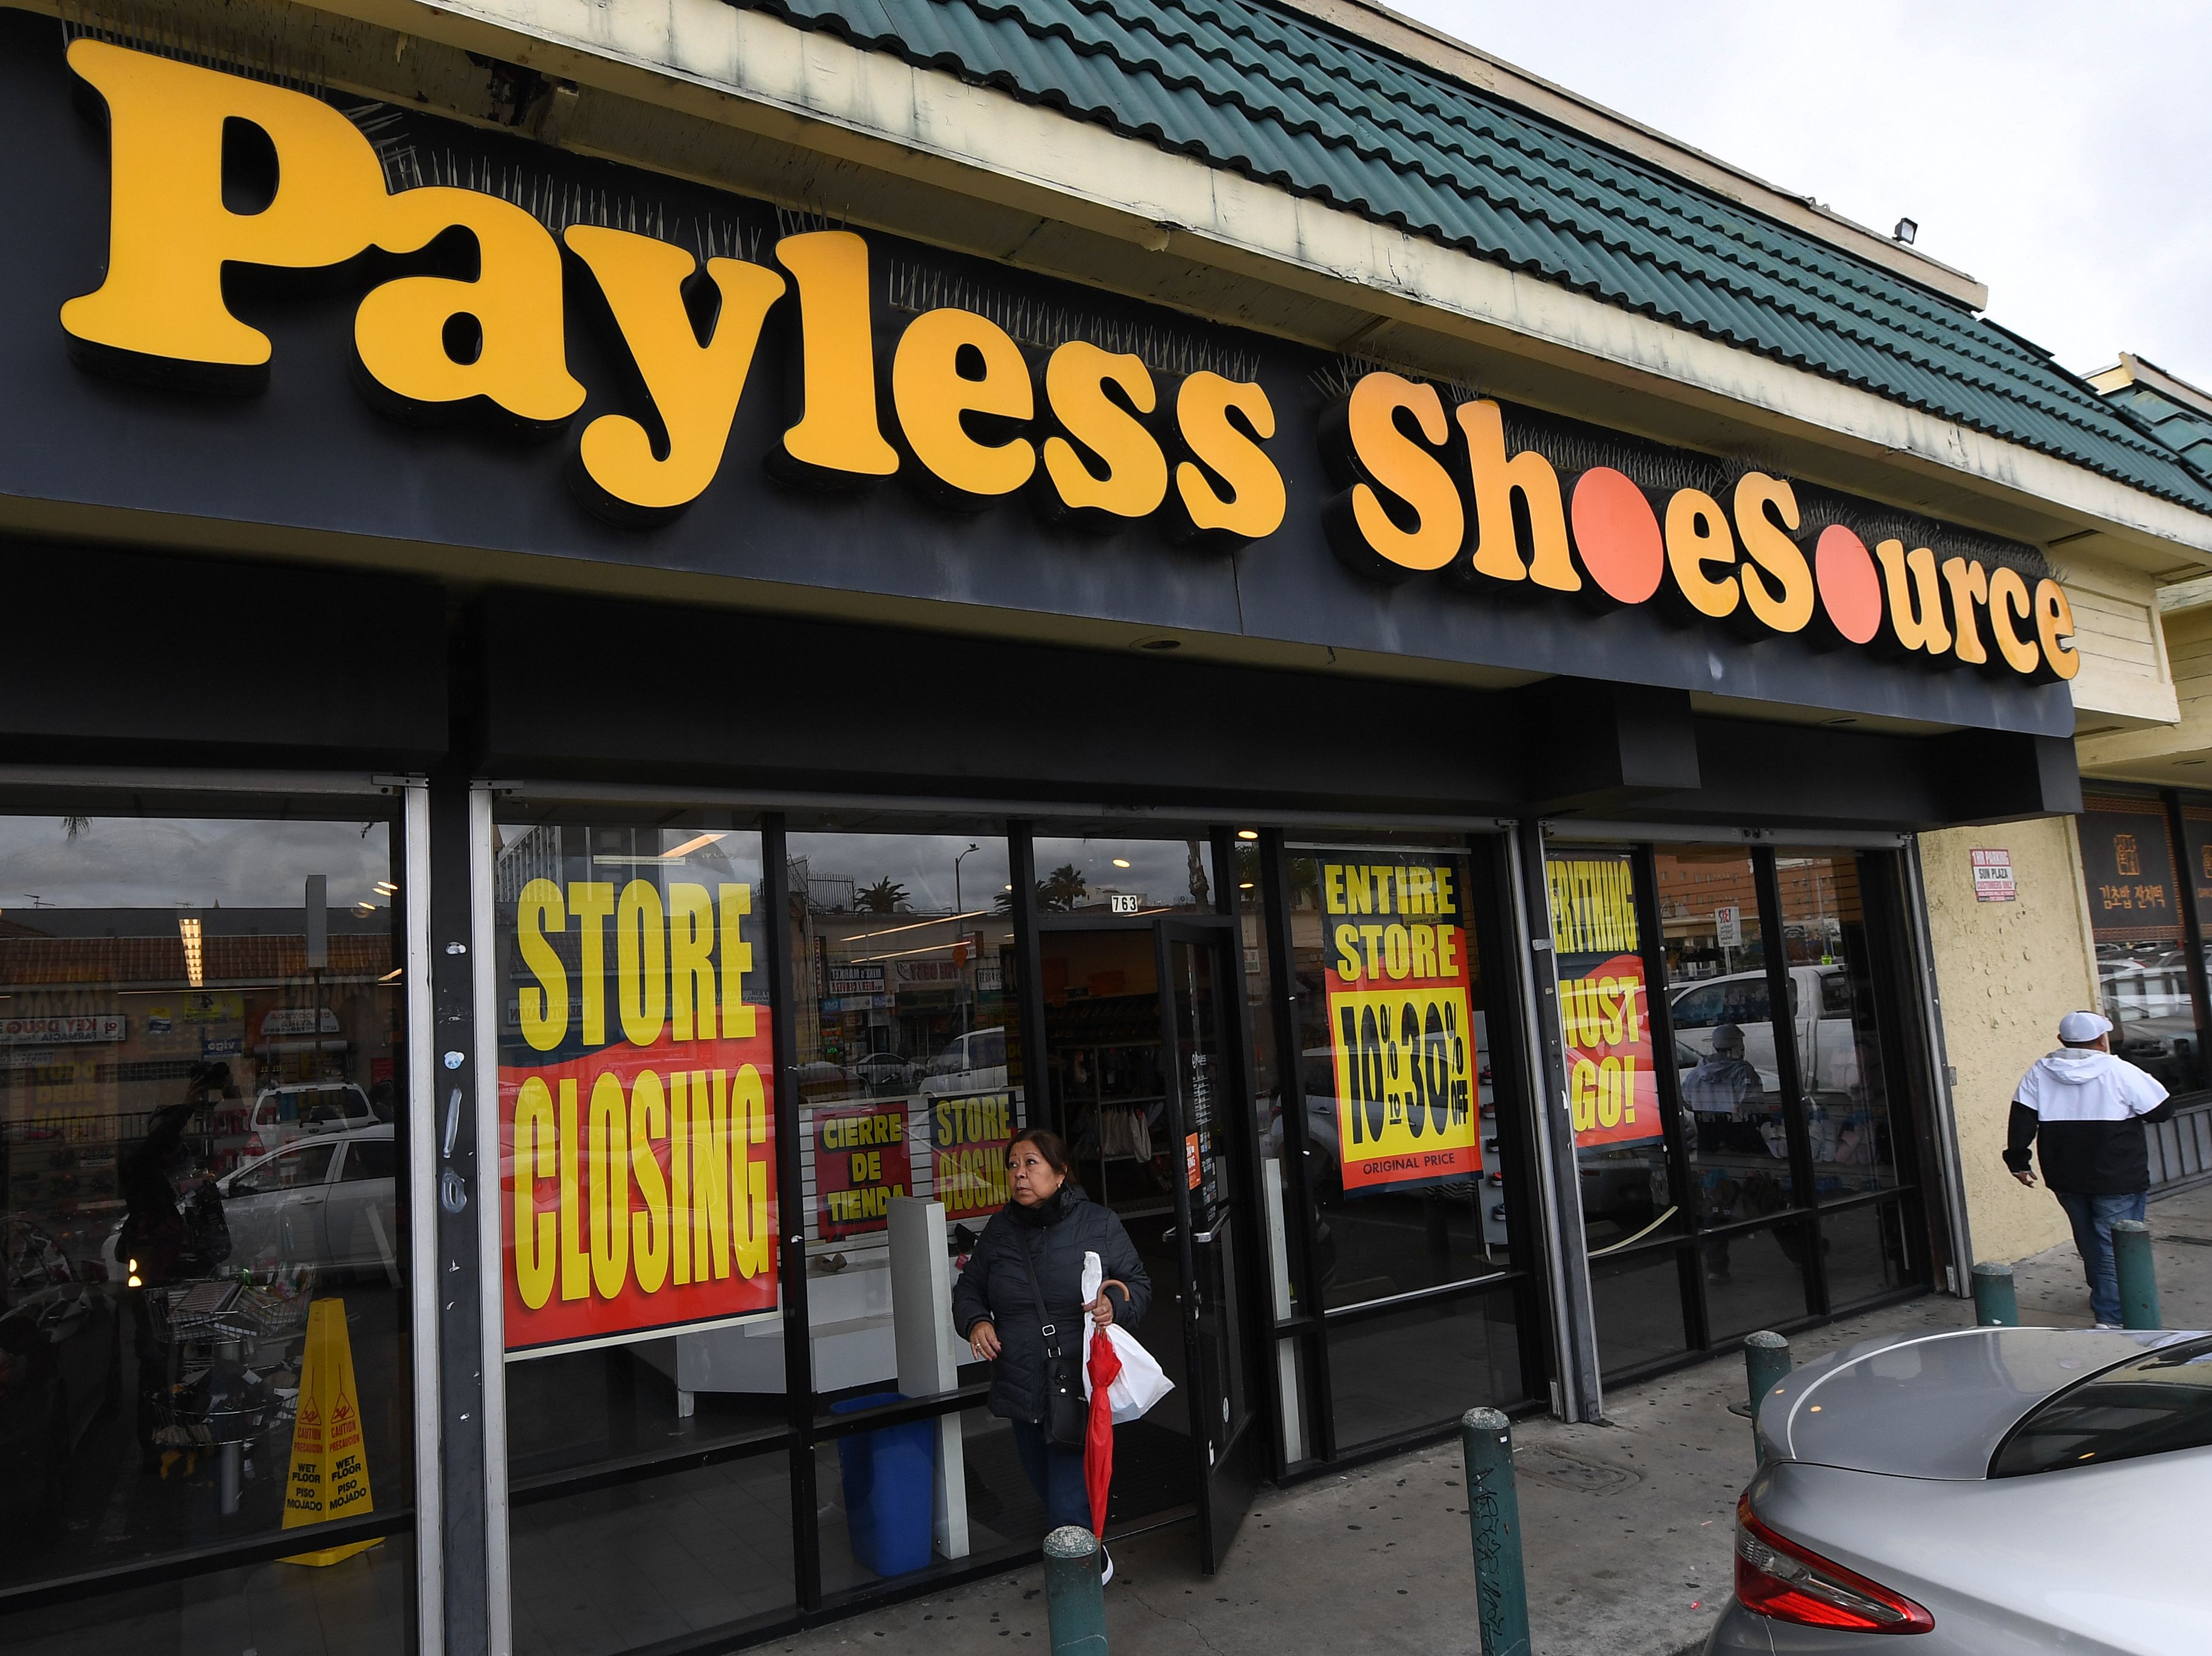 How Payless duped fashion influencers with fake luxury brand - Upworthy